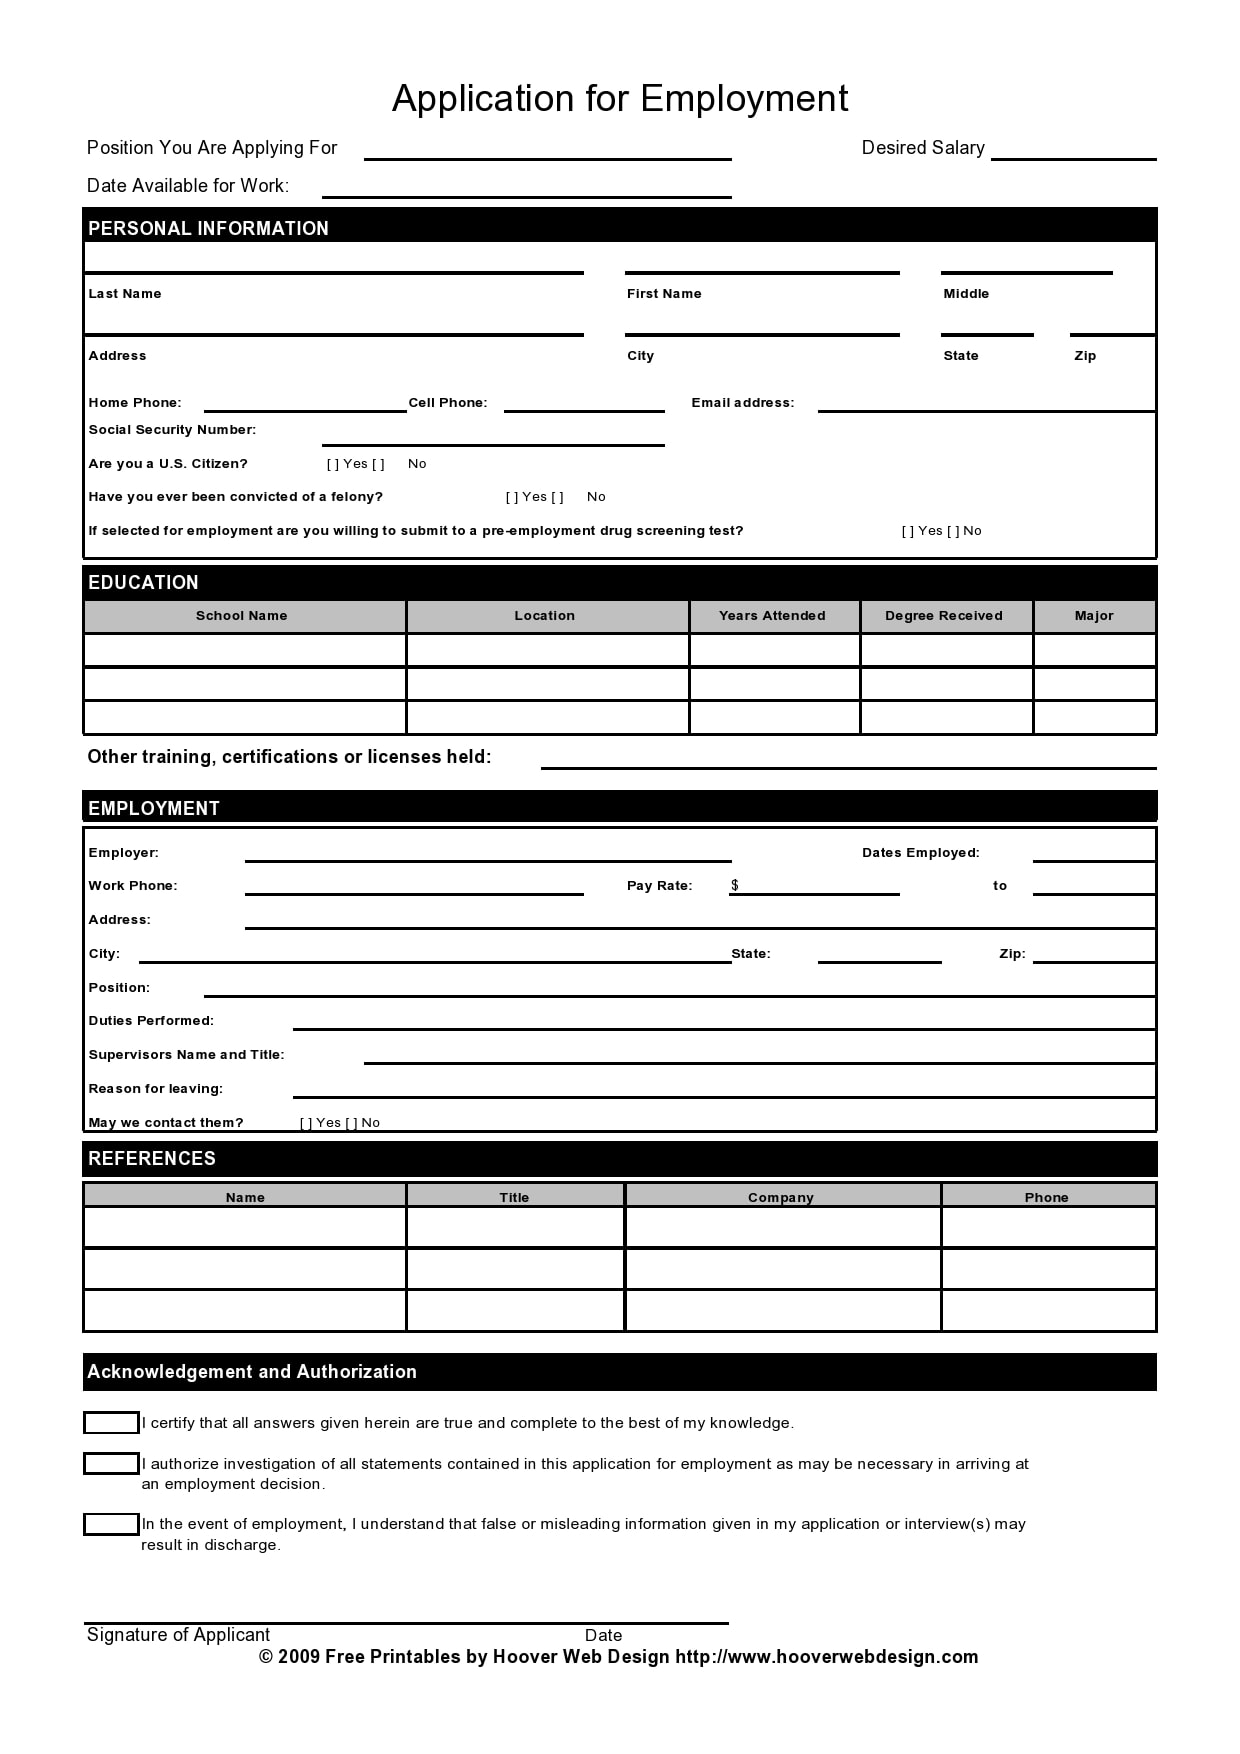 Printable Employment Application Discount Collection Save 41 Jlcatj 